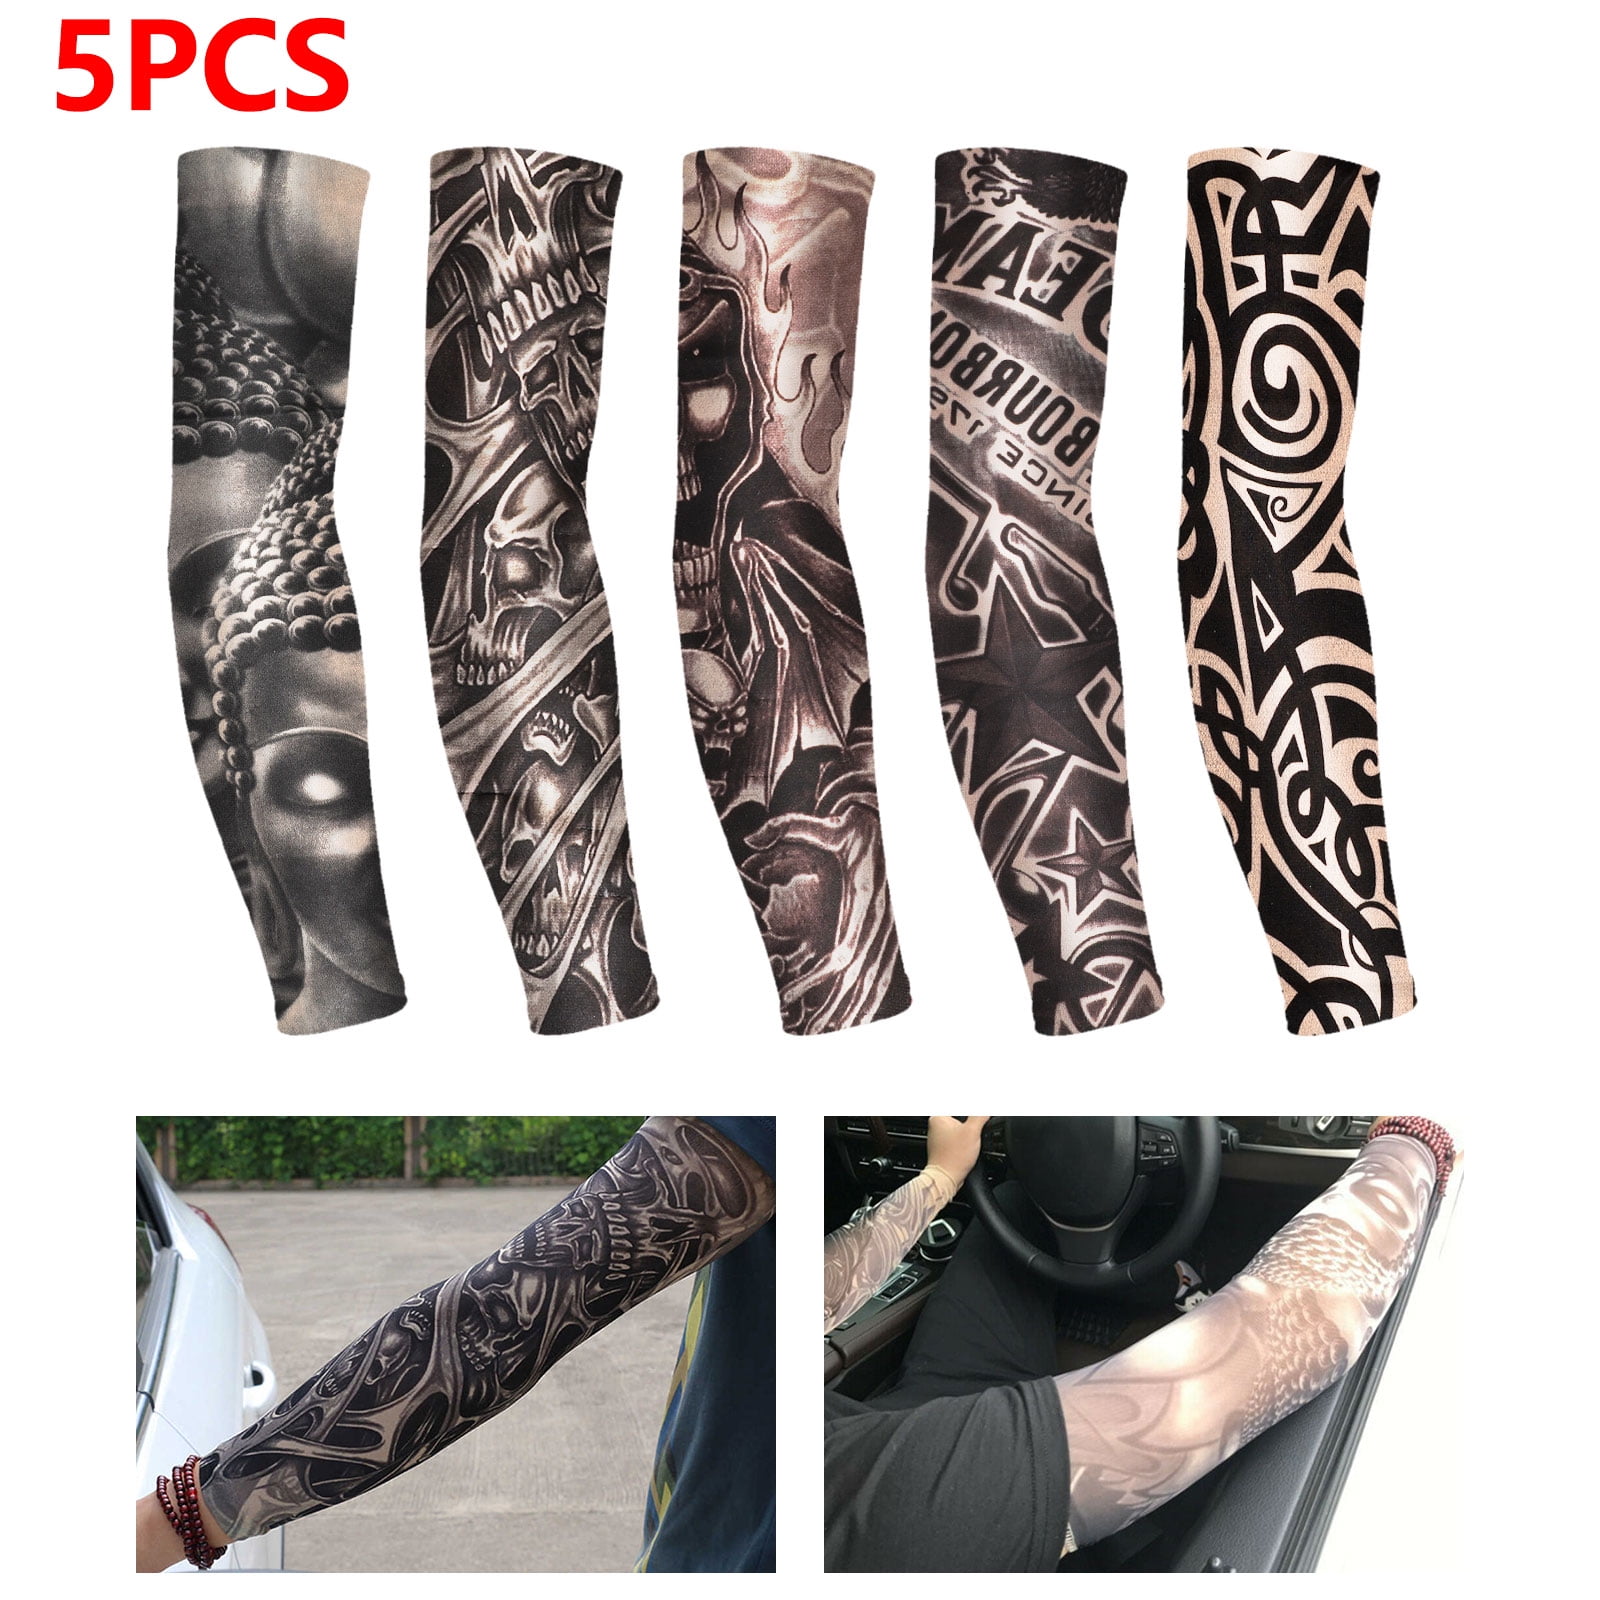 Green Adult Man Pattern Arm Sleeves Stretch Cover UV Sun Protection Large size 